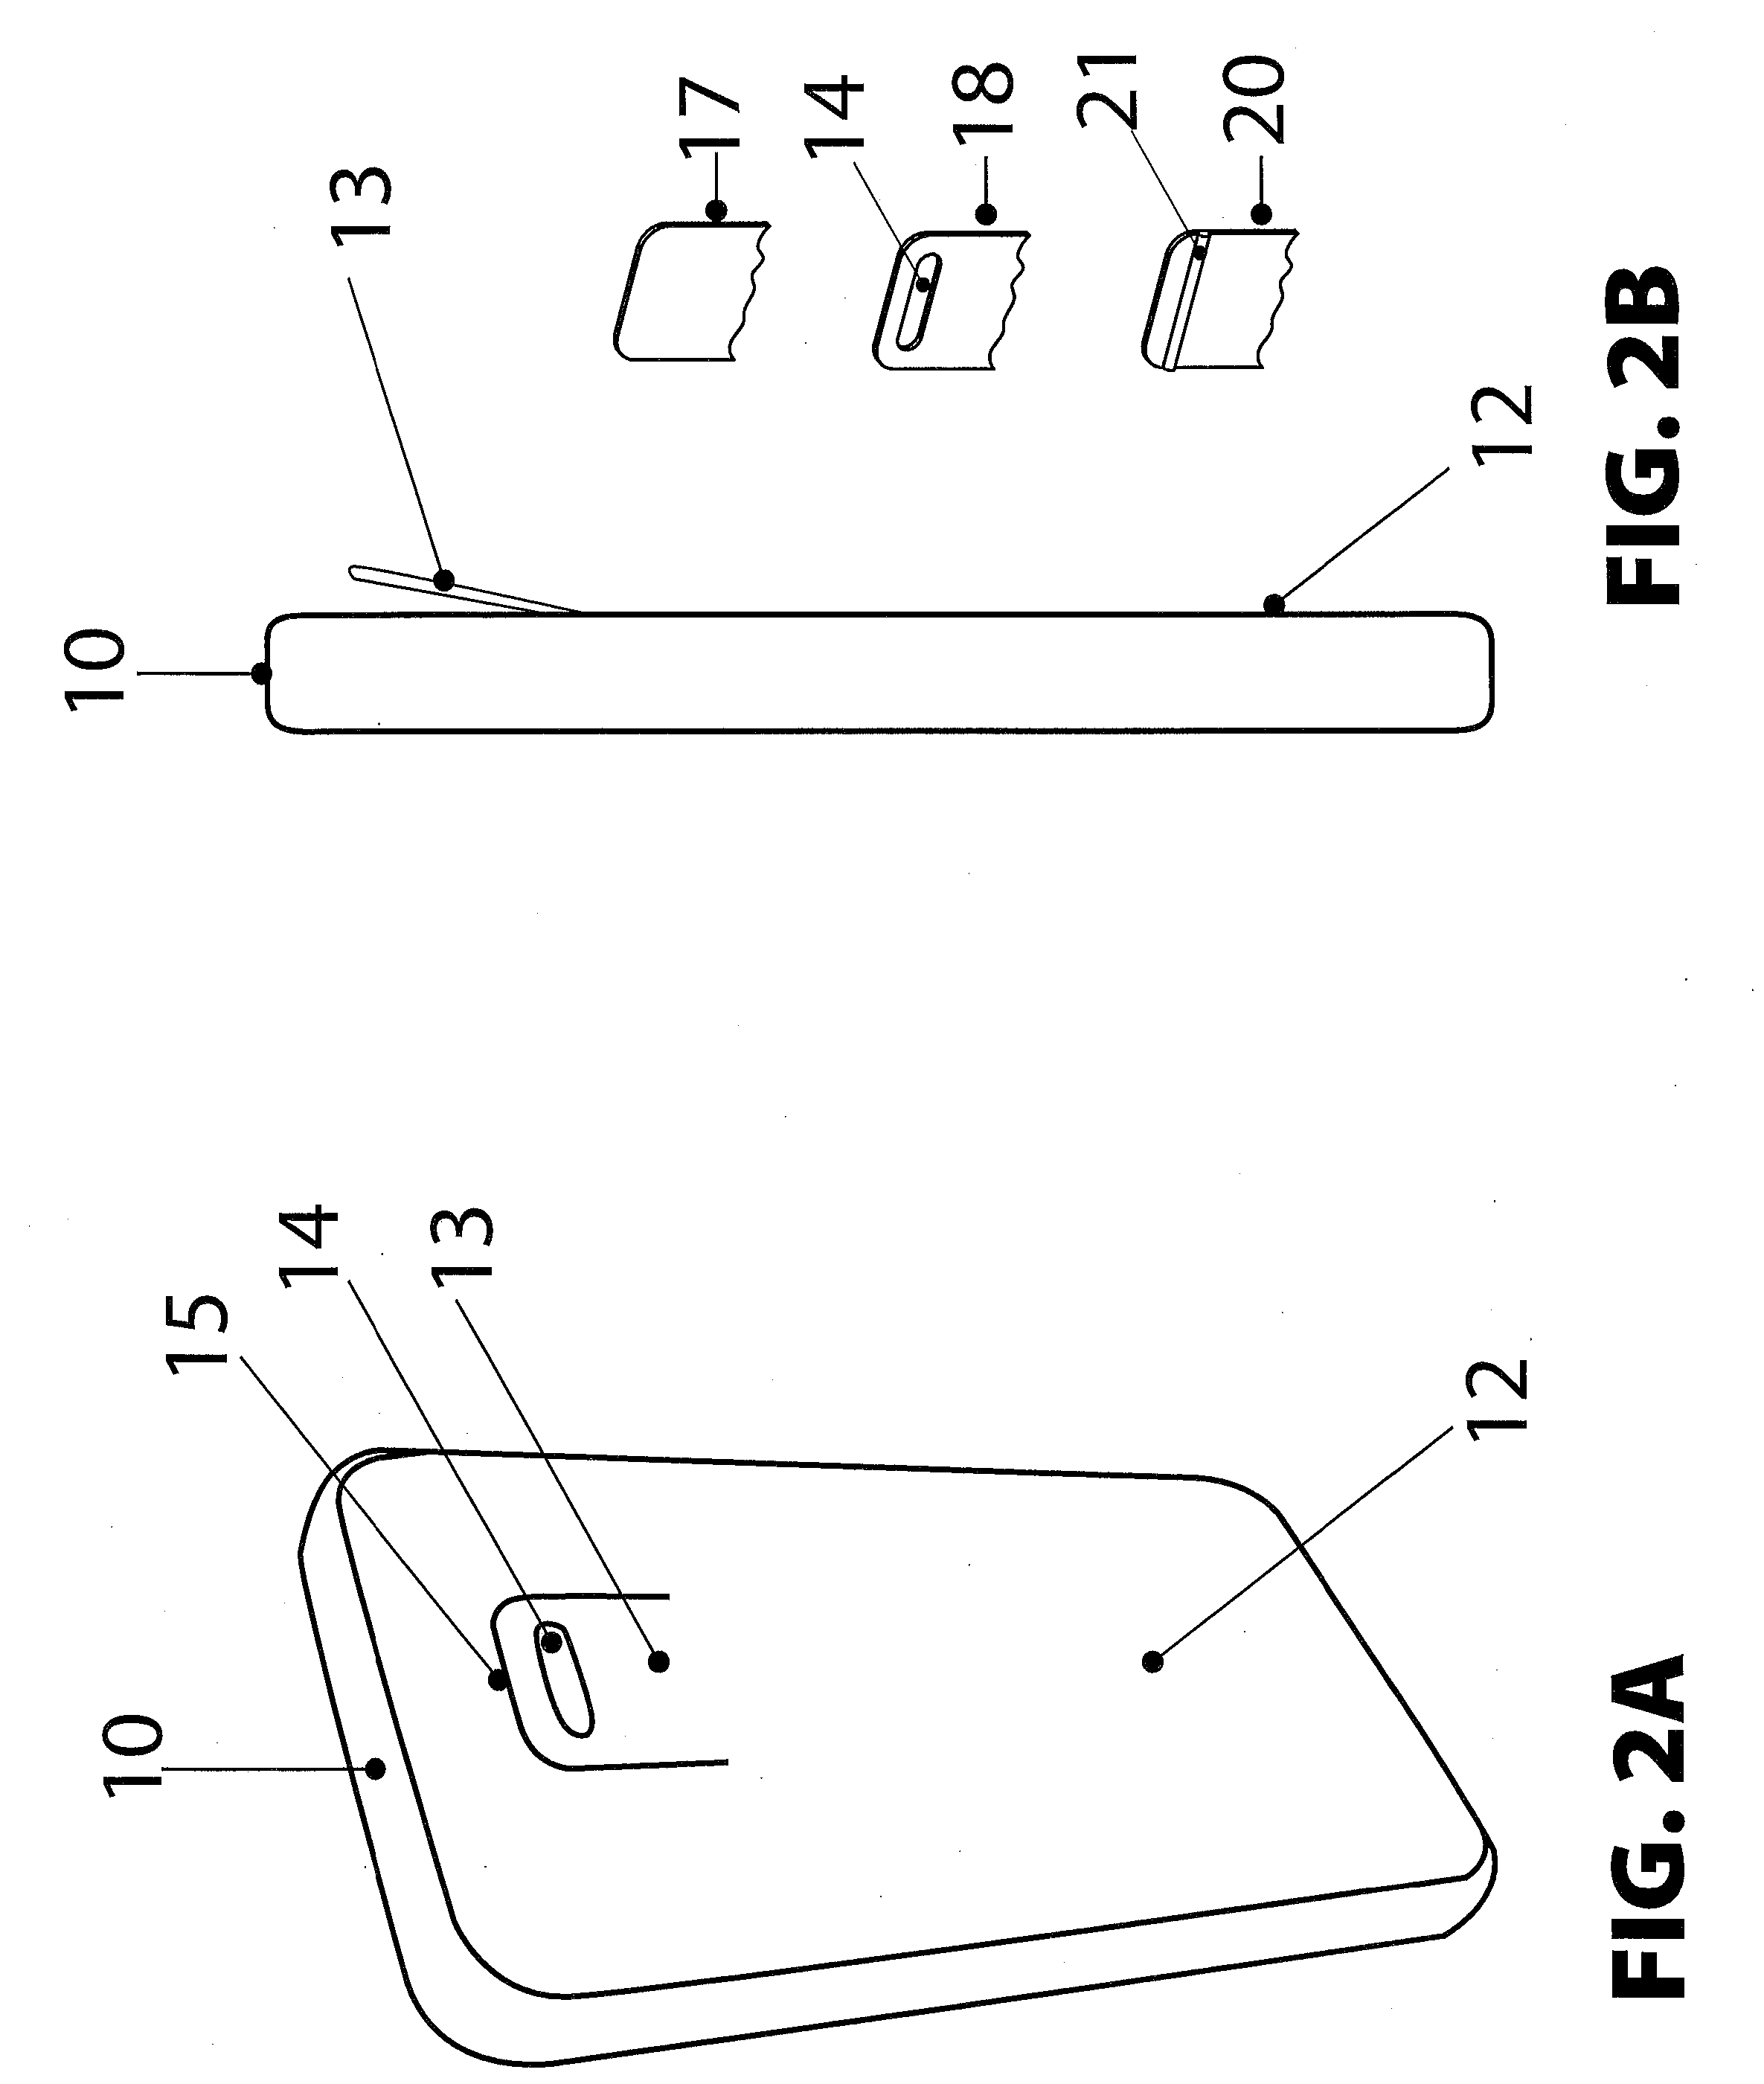 Apparatus for carrying hand-held wireless electronic device